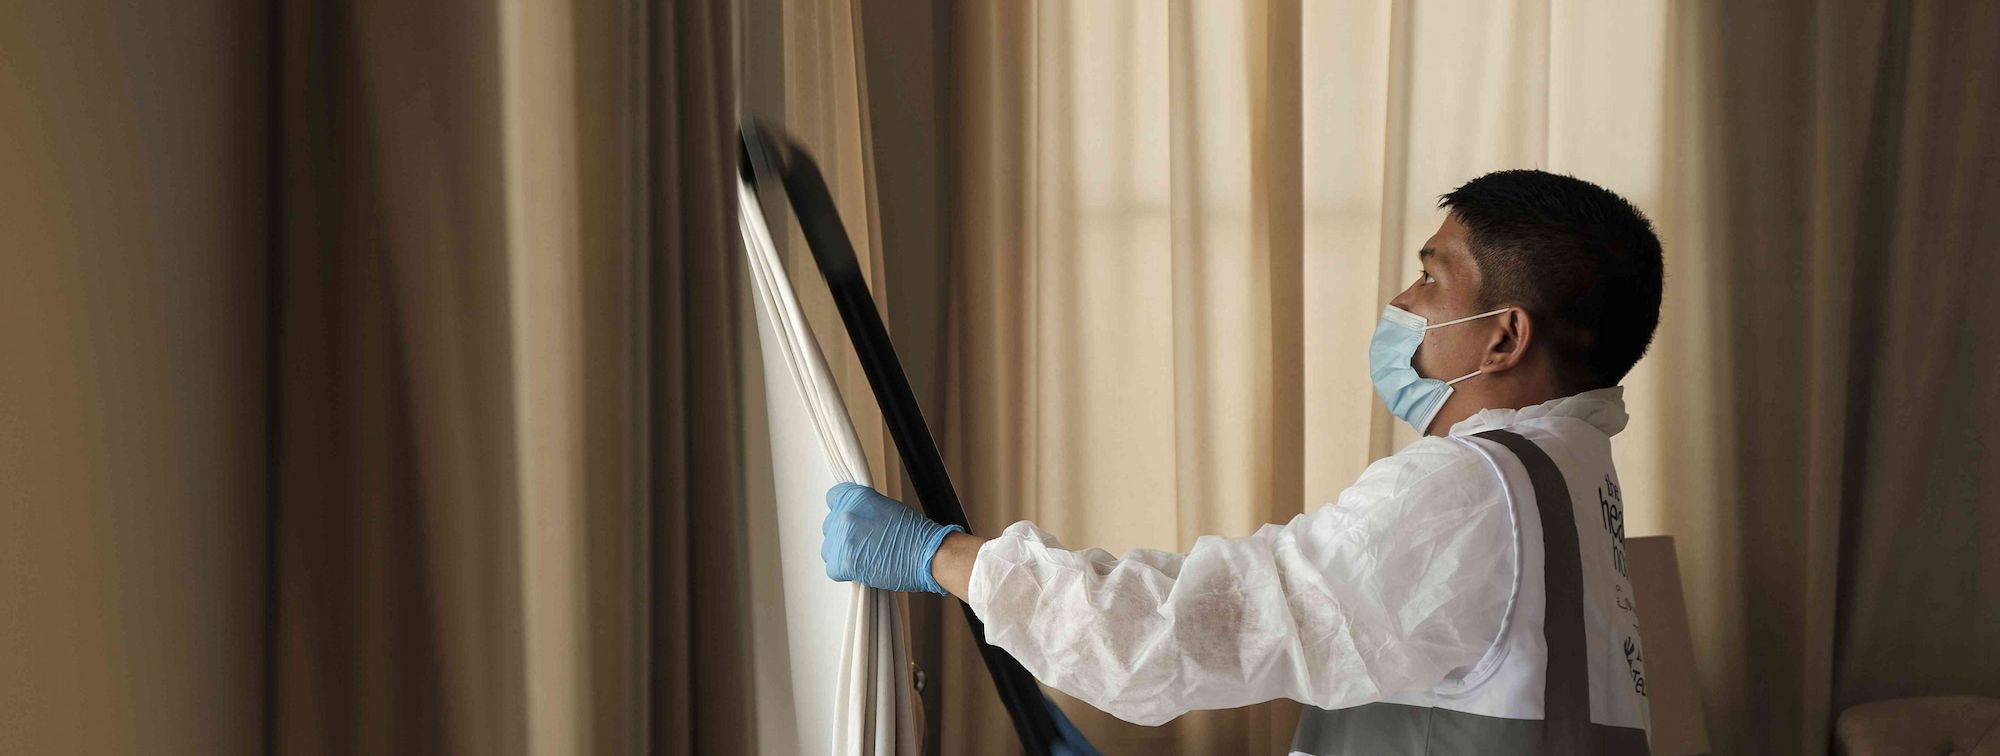 What is the best way to clean curtains? [Dubai]